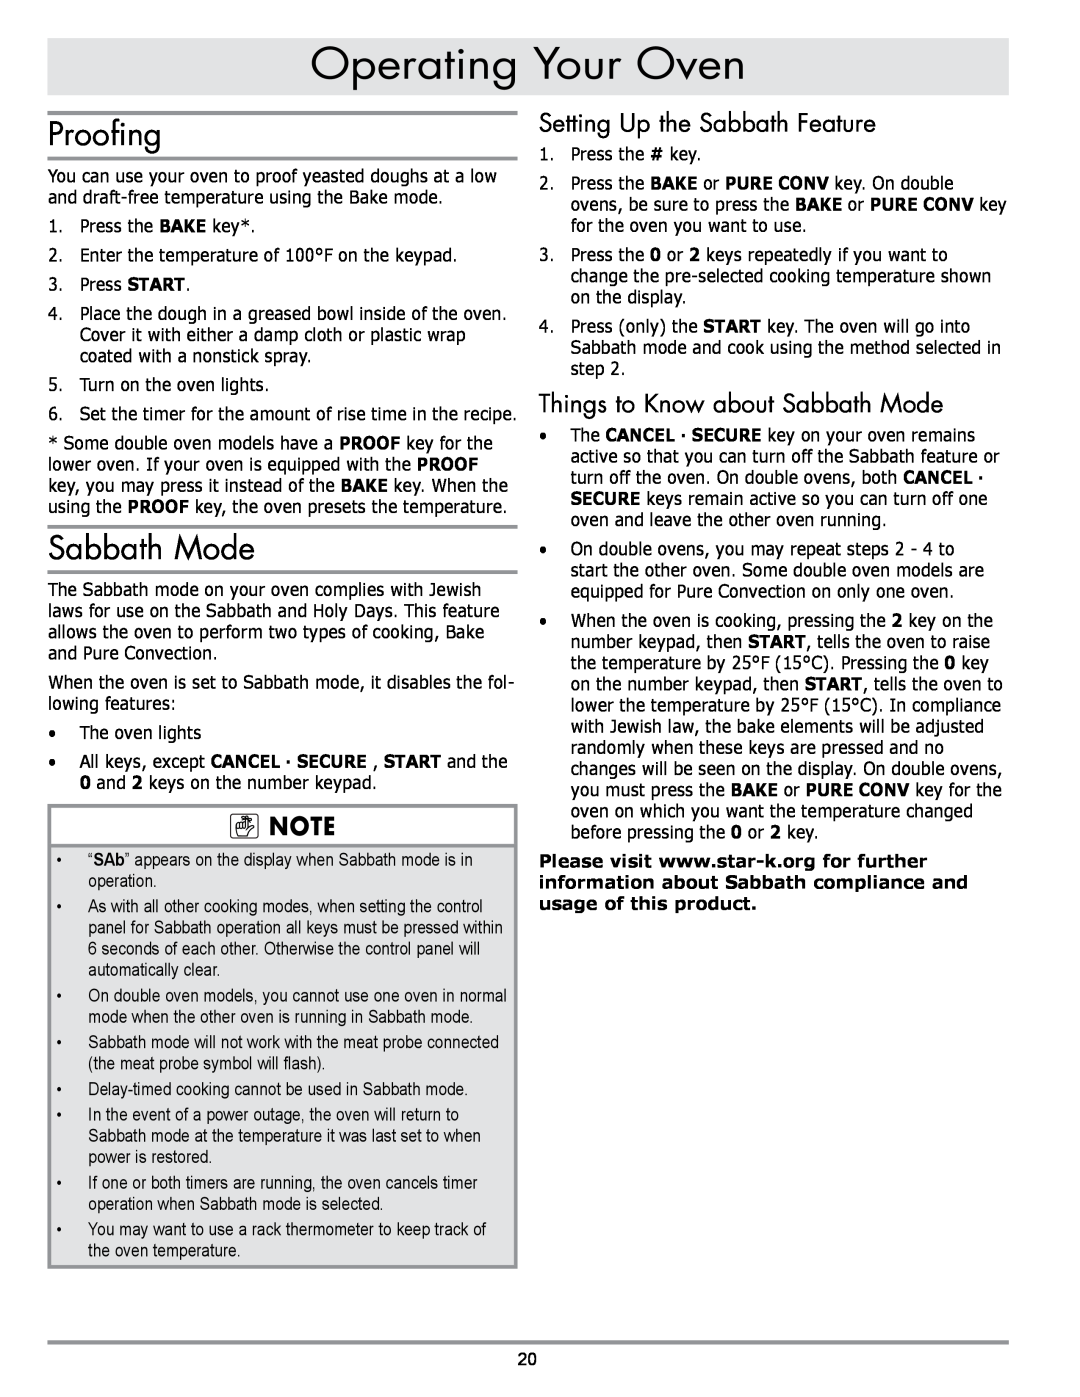 Sears EORD230 manual Proofing, Setting Up the Sabbath Feature, Things to Know about Sabbath Mode, Operating Your Oven 